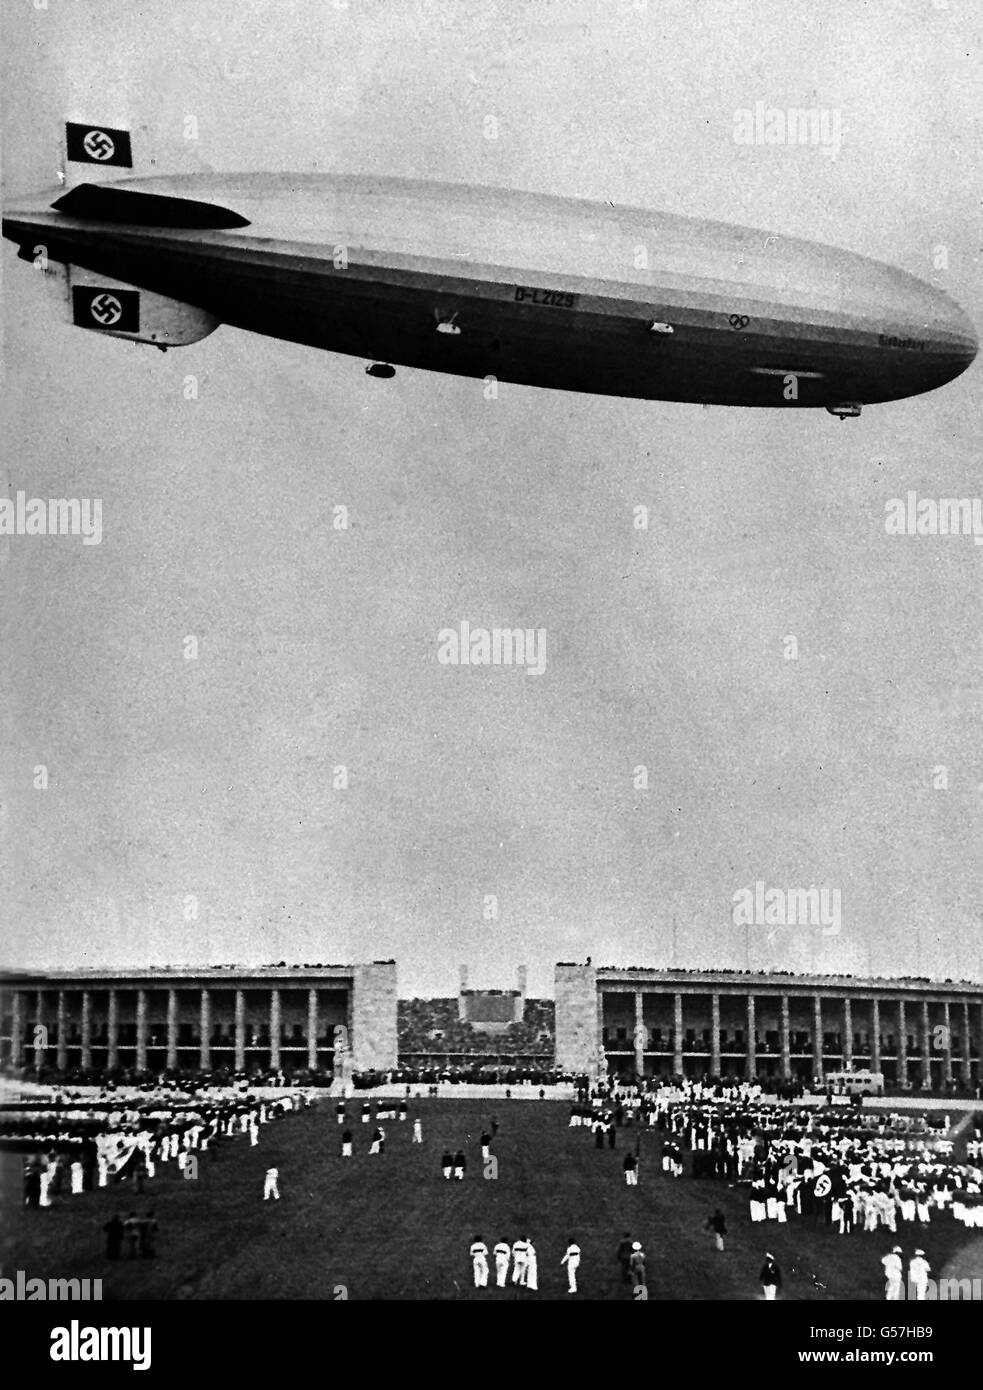 HINDENBURG: The German airship 'Hindenburg', sporting swastika flags on her tail fins, flying over the 1936 Berlin Olympic Games. On May 6th 1937 the airship exploded in a ball of fire as she came in to land in New Jersey, USA. At least 33 passengers and crew were killed. Stock Photo